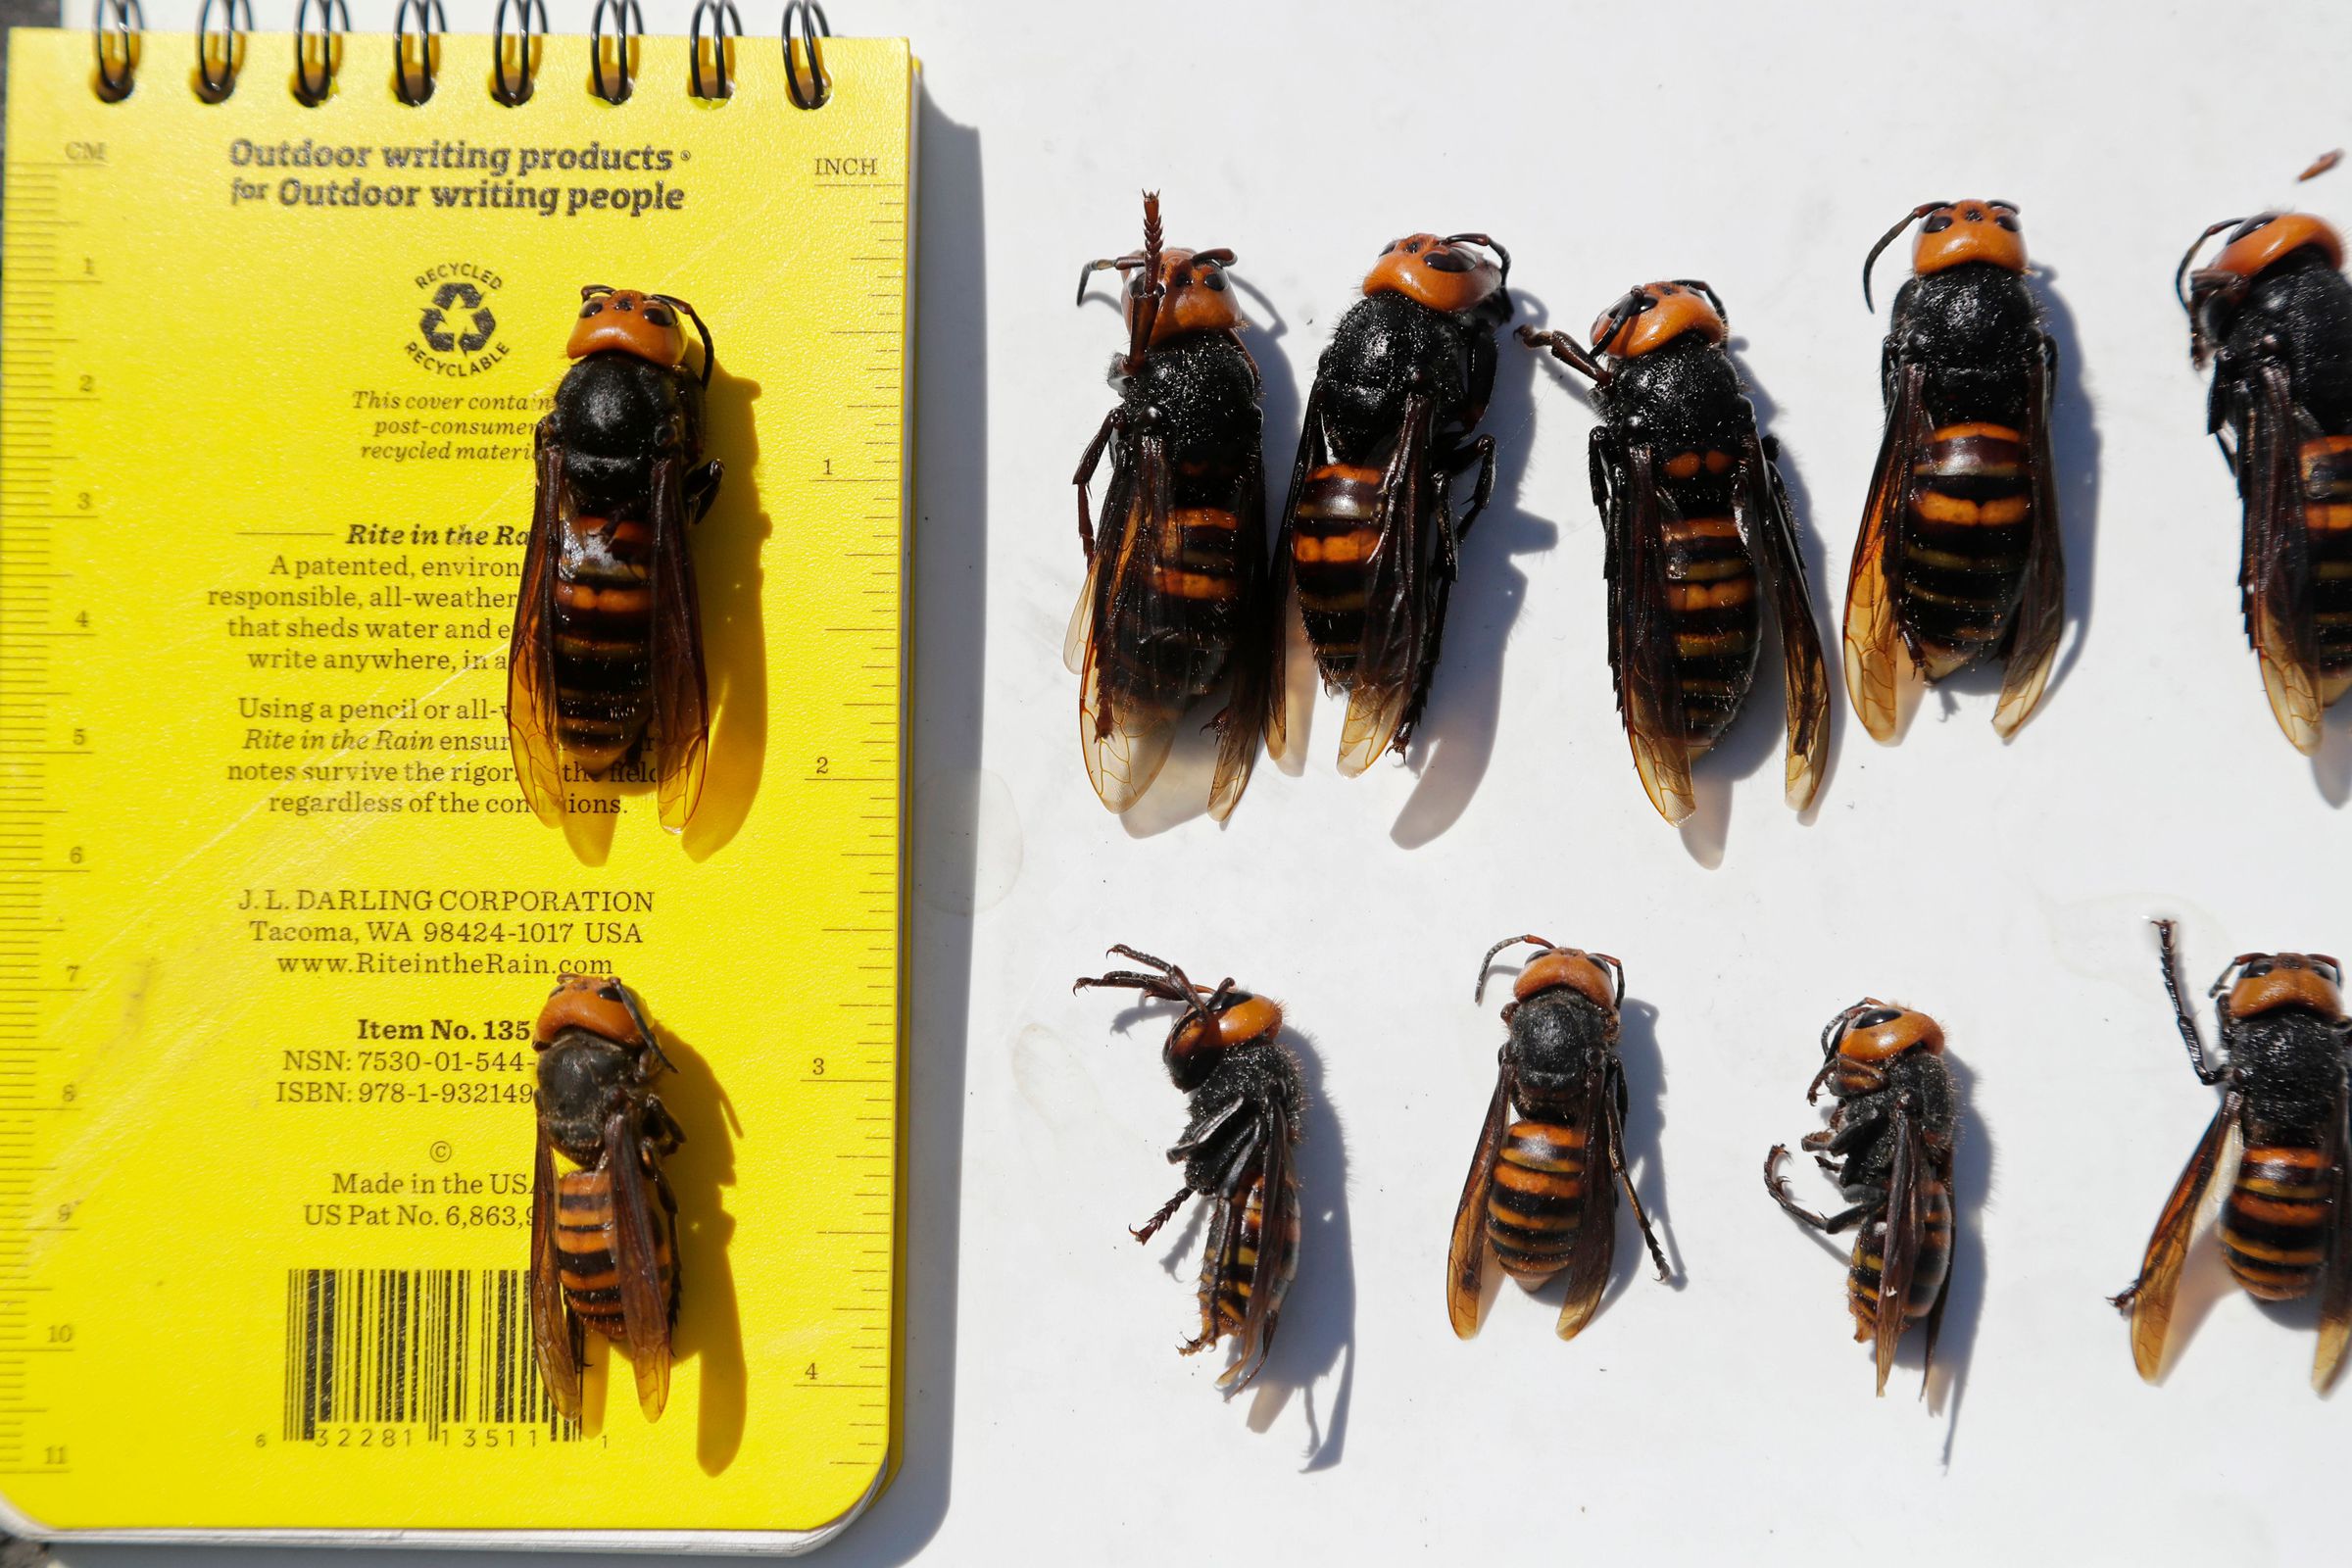 Dead giant hornets lined up in two rows next to a notebook